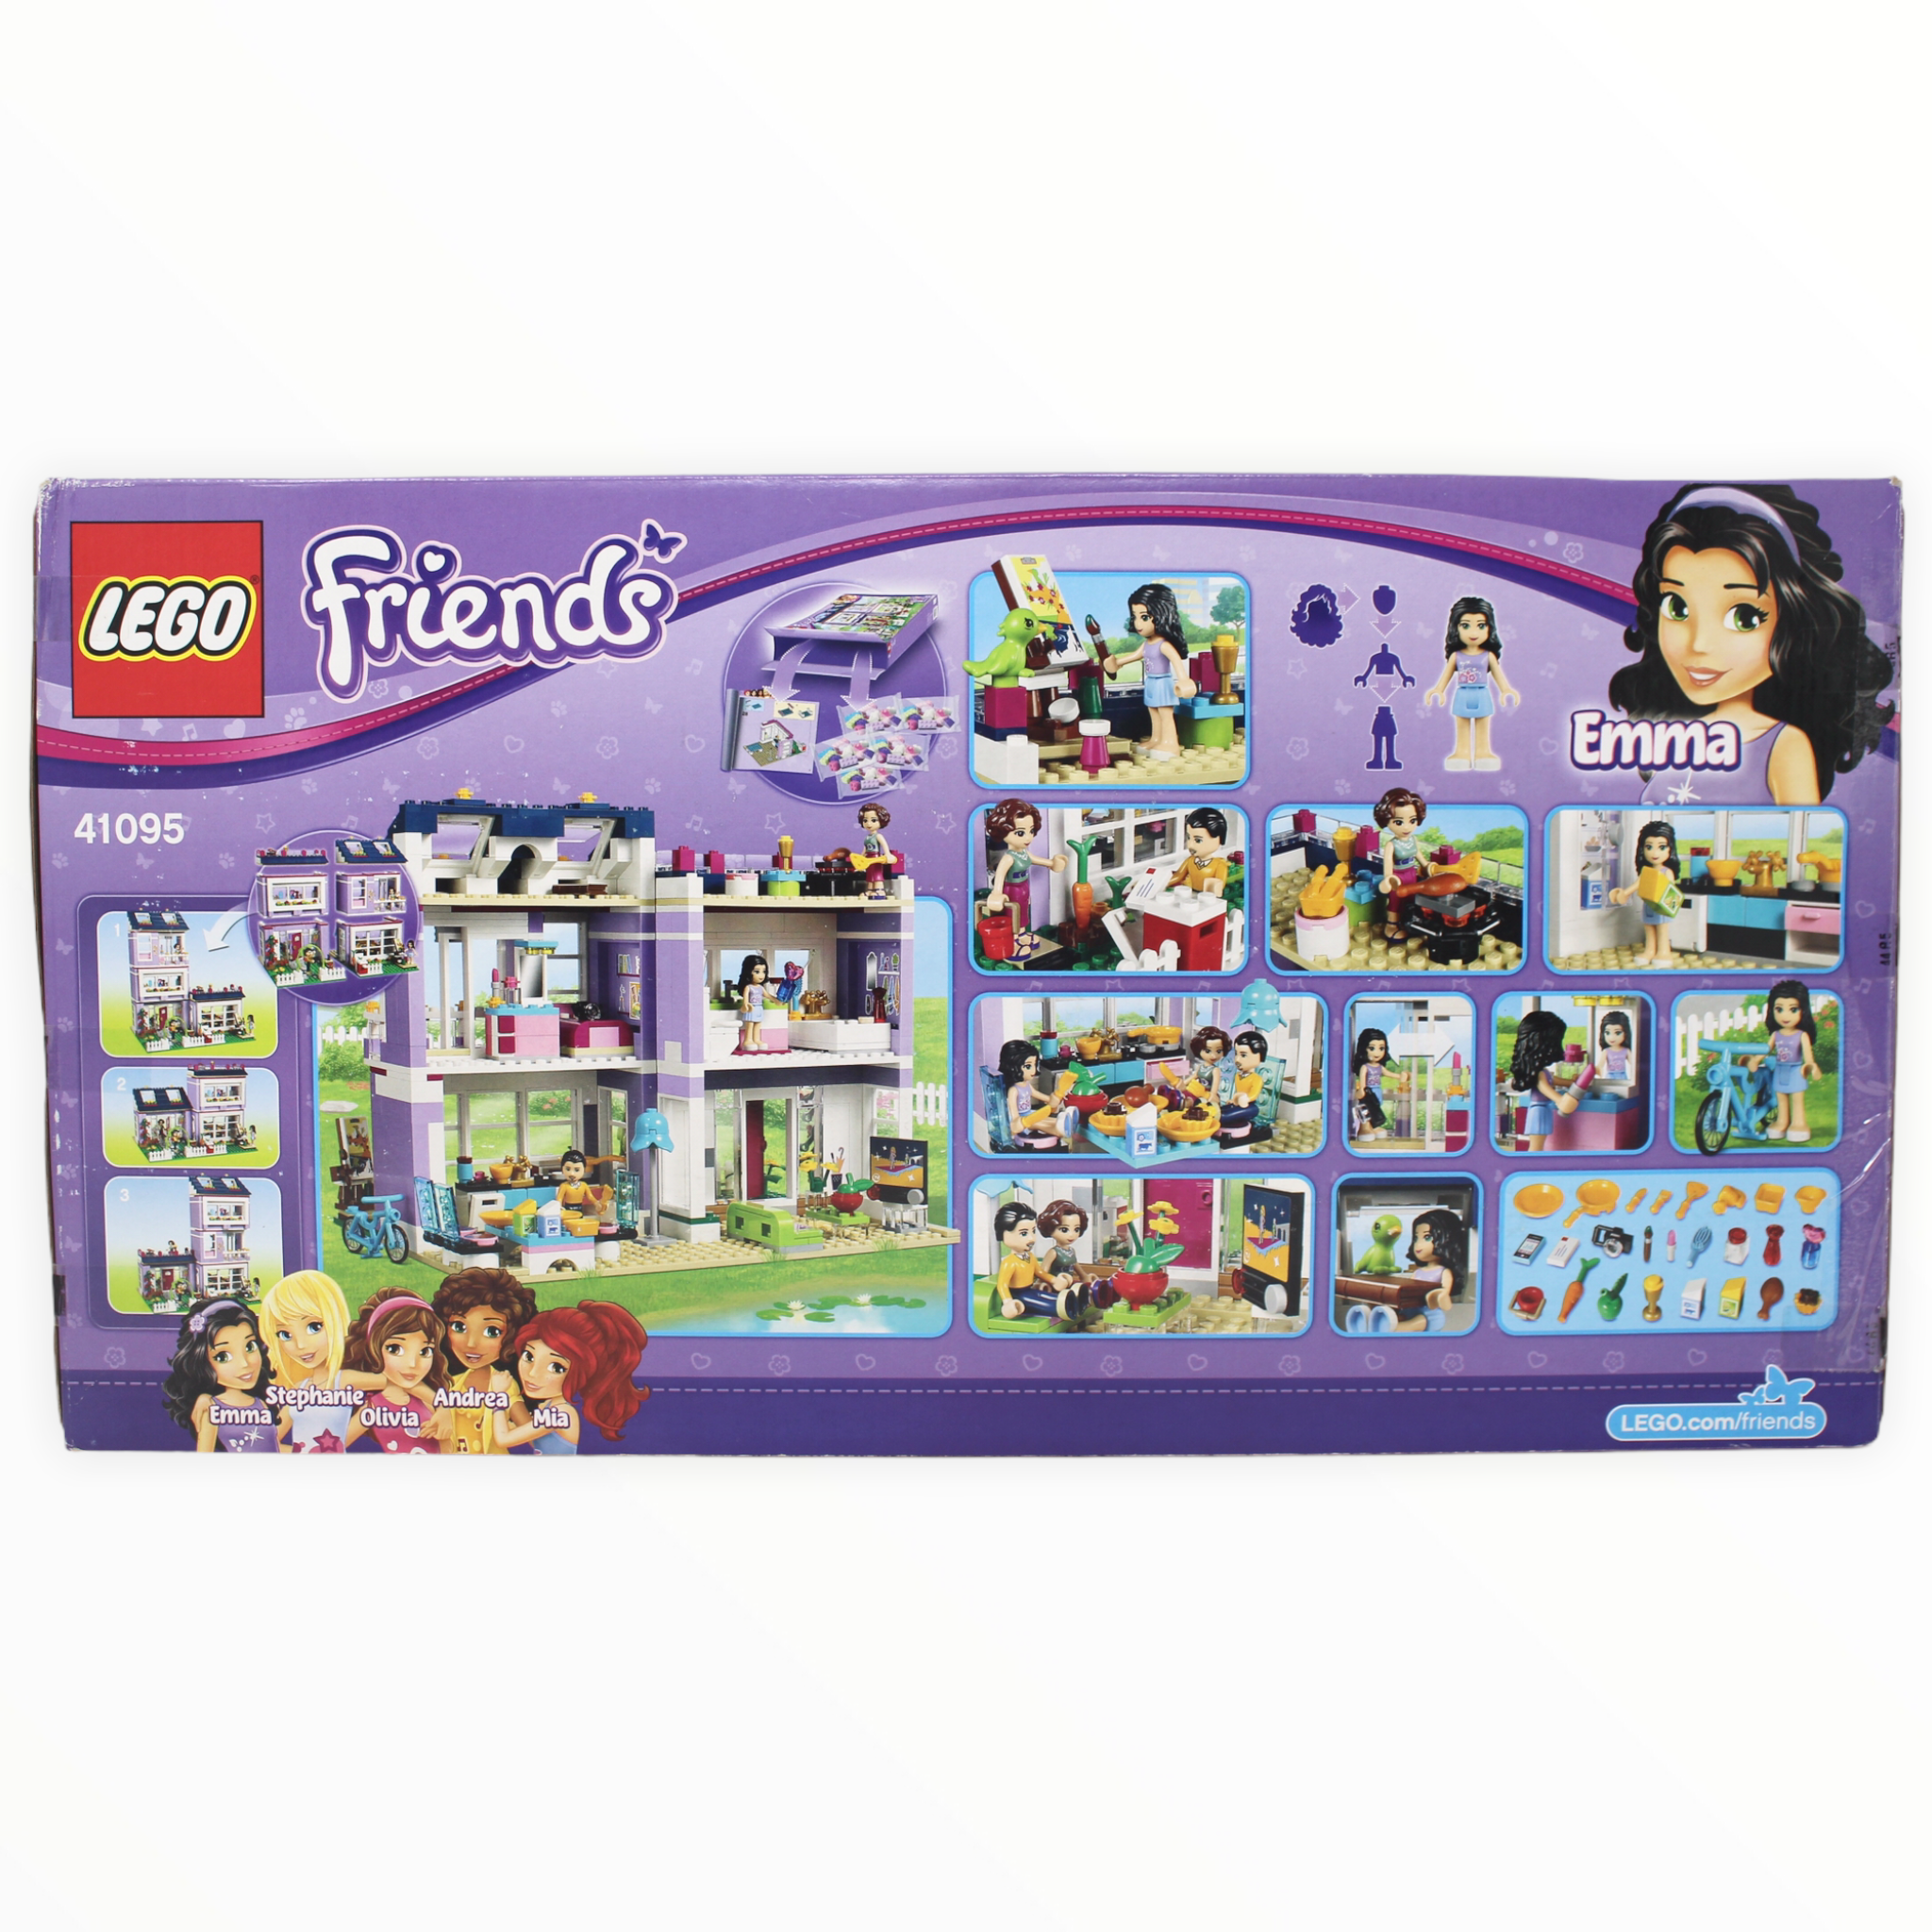 Certified Used Set 41095 Friends Emma’s House